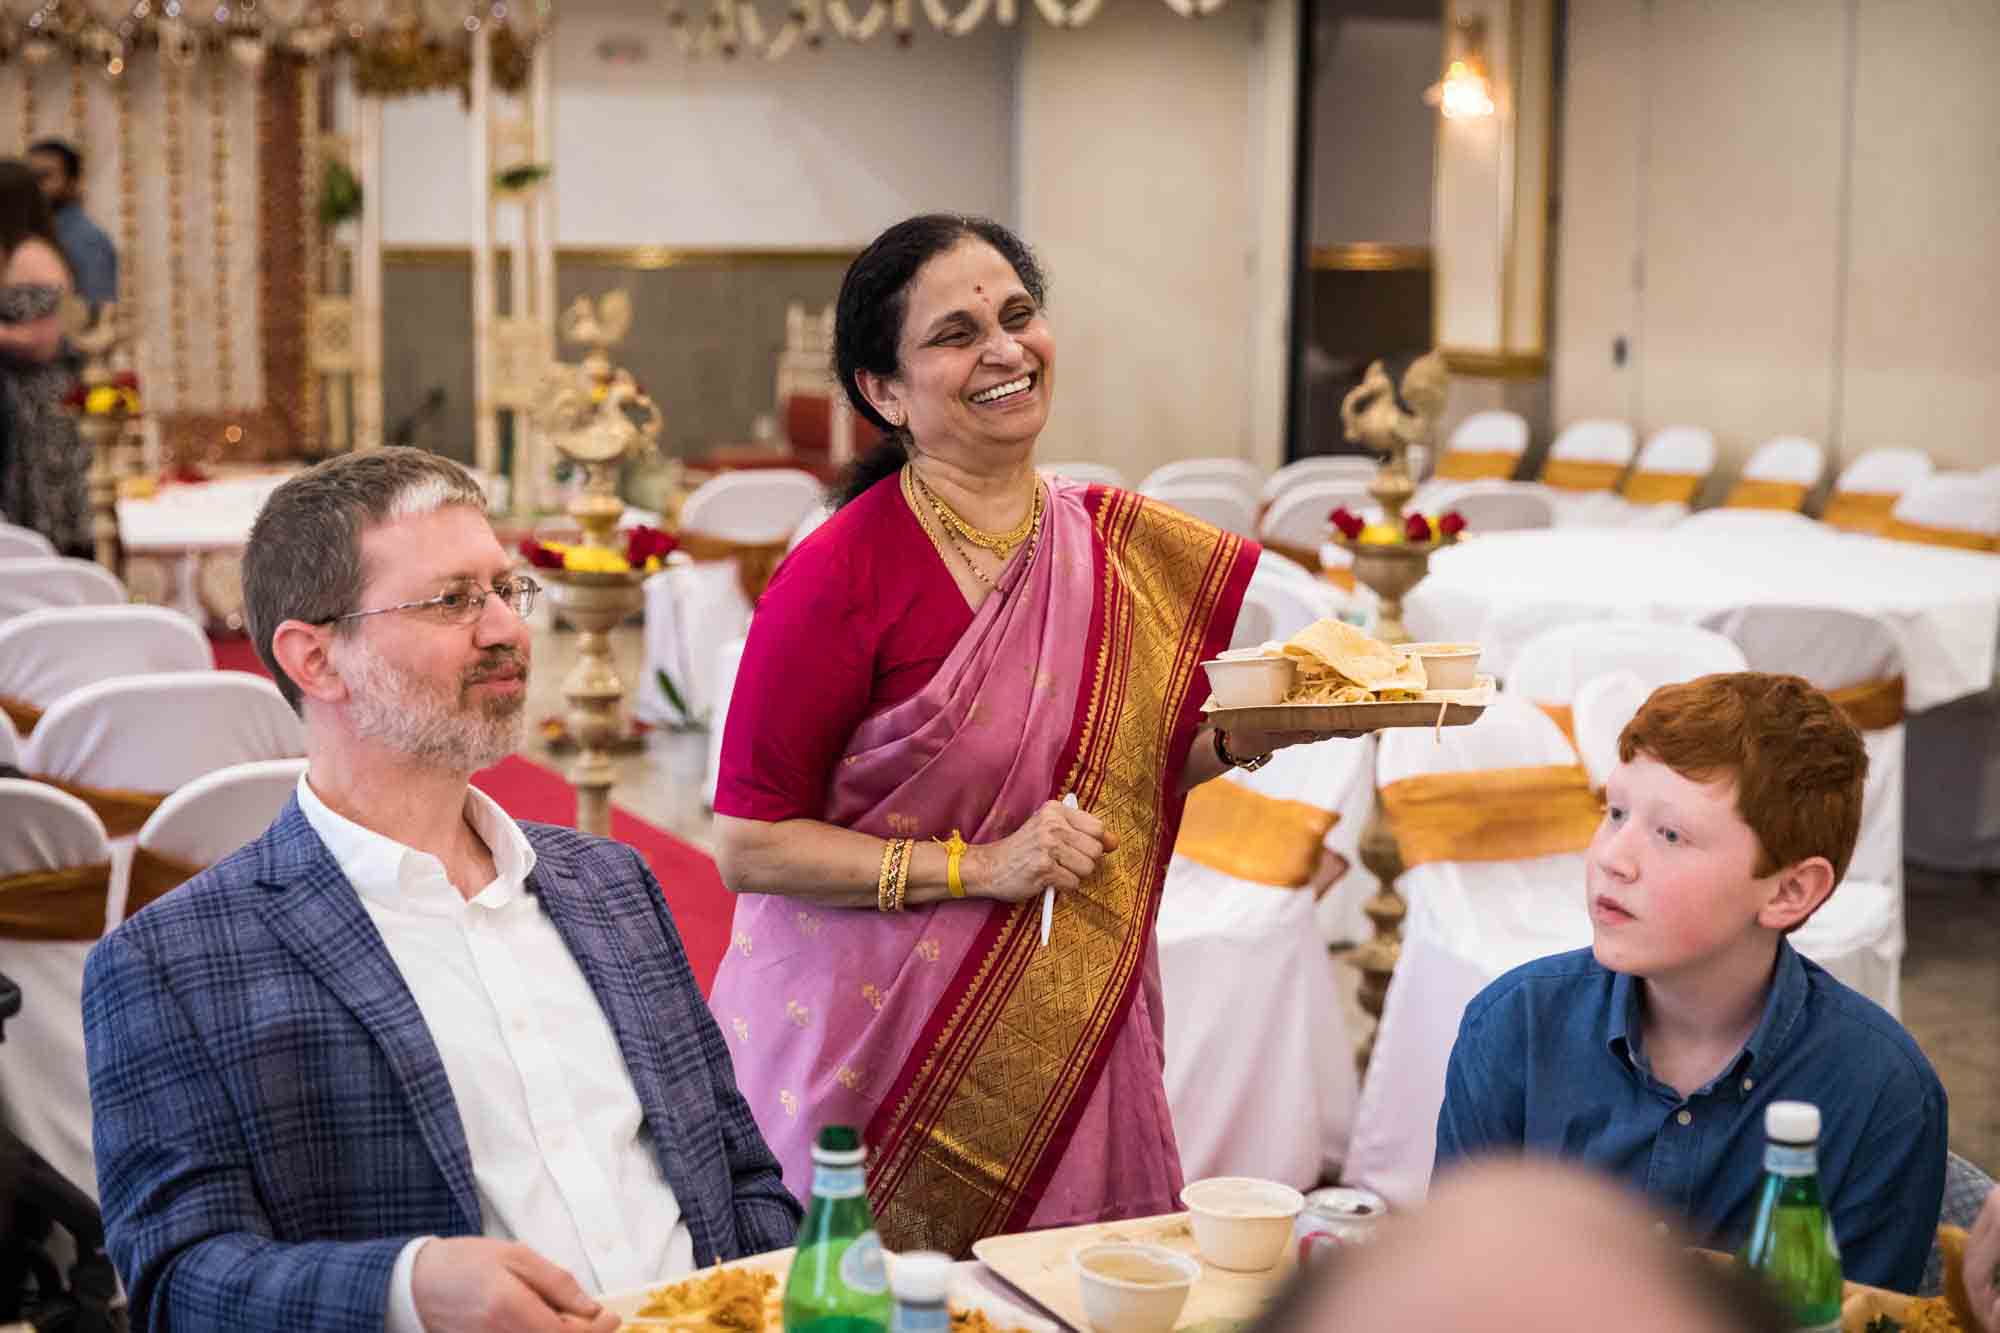 Hindu Temple Society of North America wedding photos of older Indian woman wearing sari chatting with guests at a table